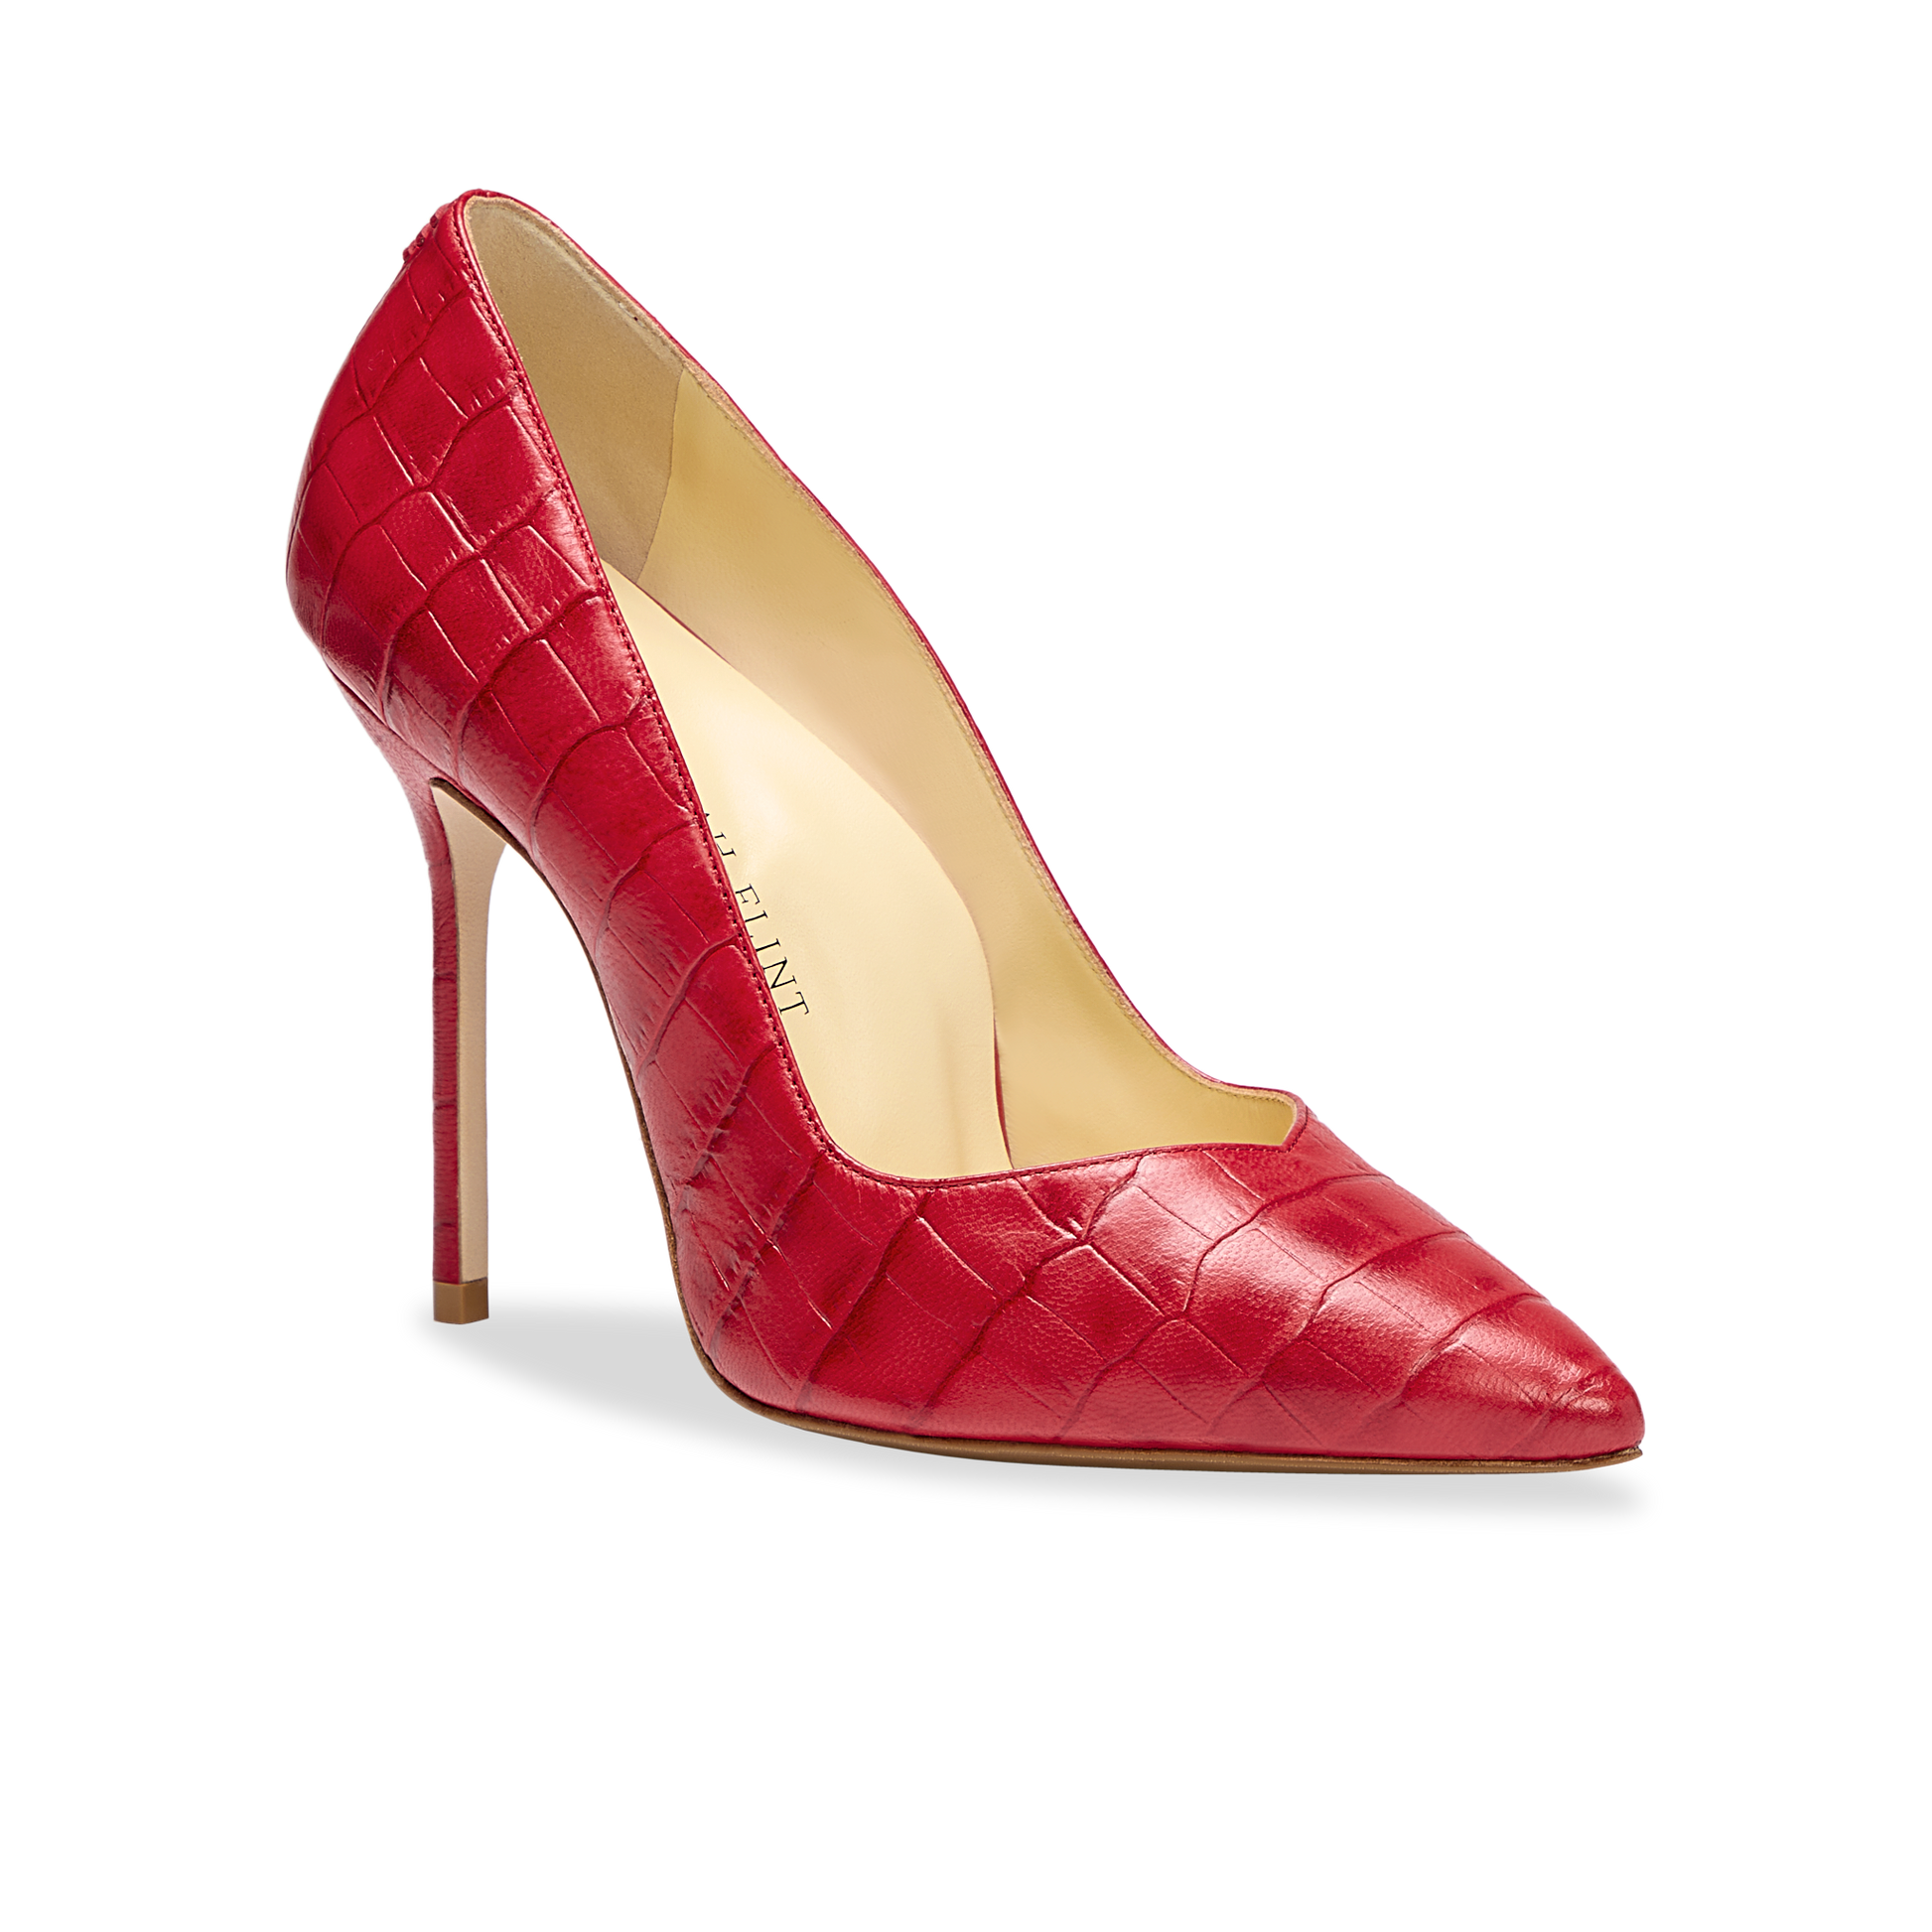 Perfect Pump 100 in Red Croc Embossed Nappa